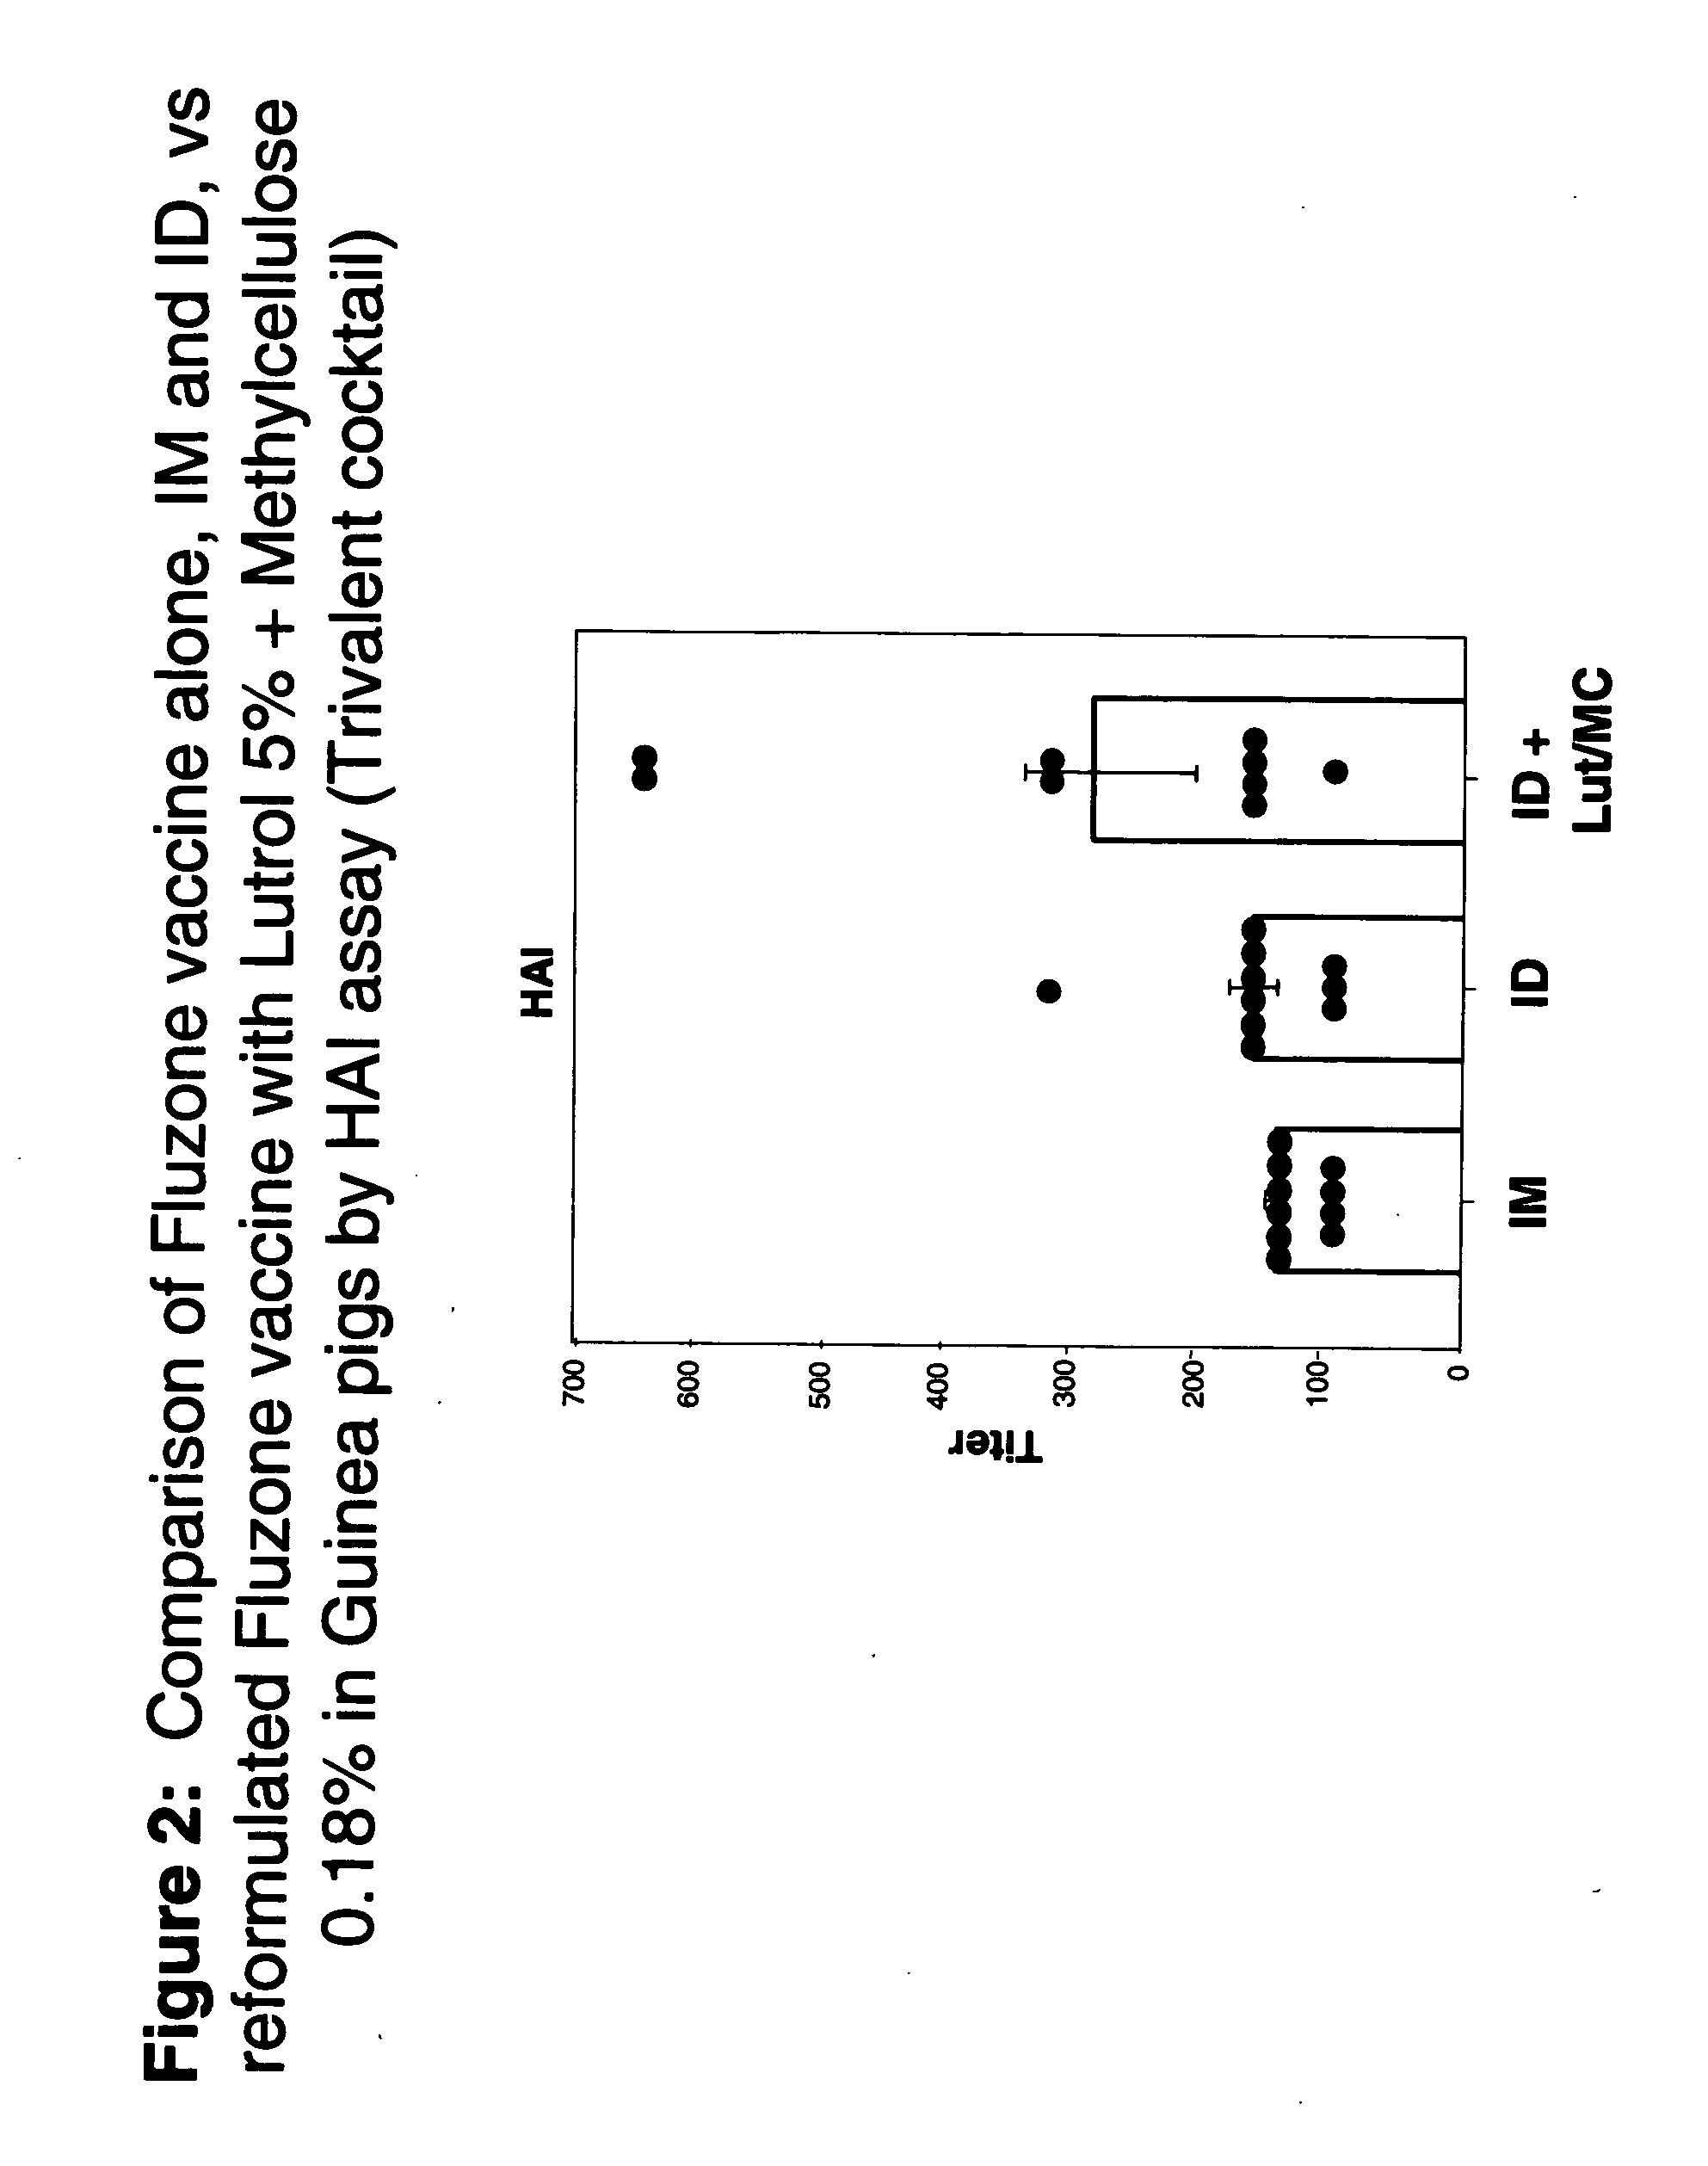 Compositions with enhanced immunogenicity